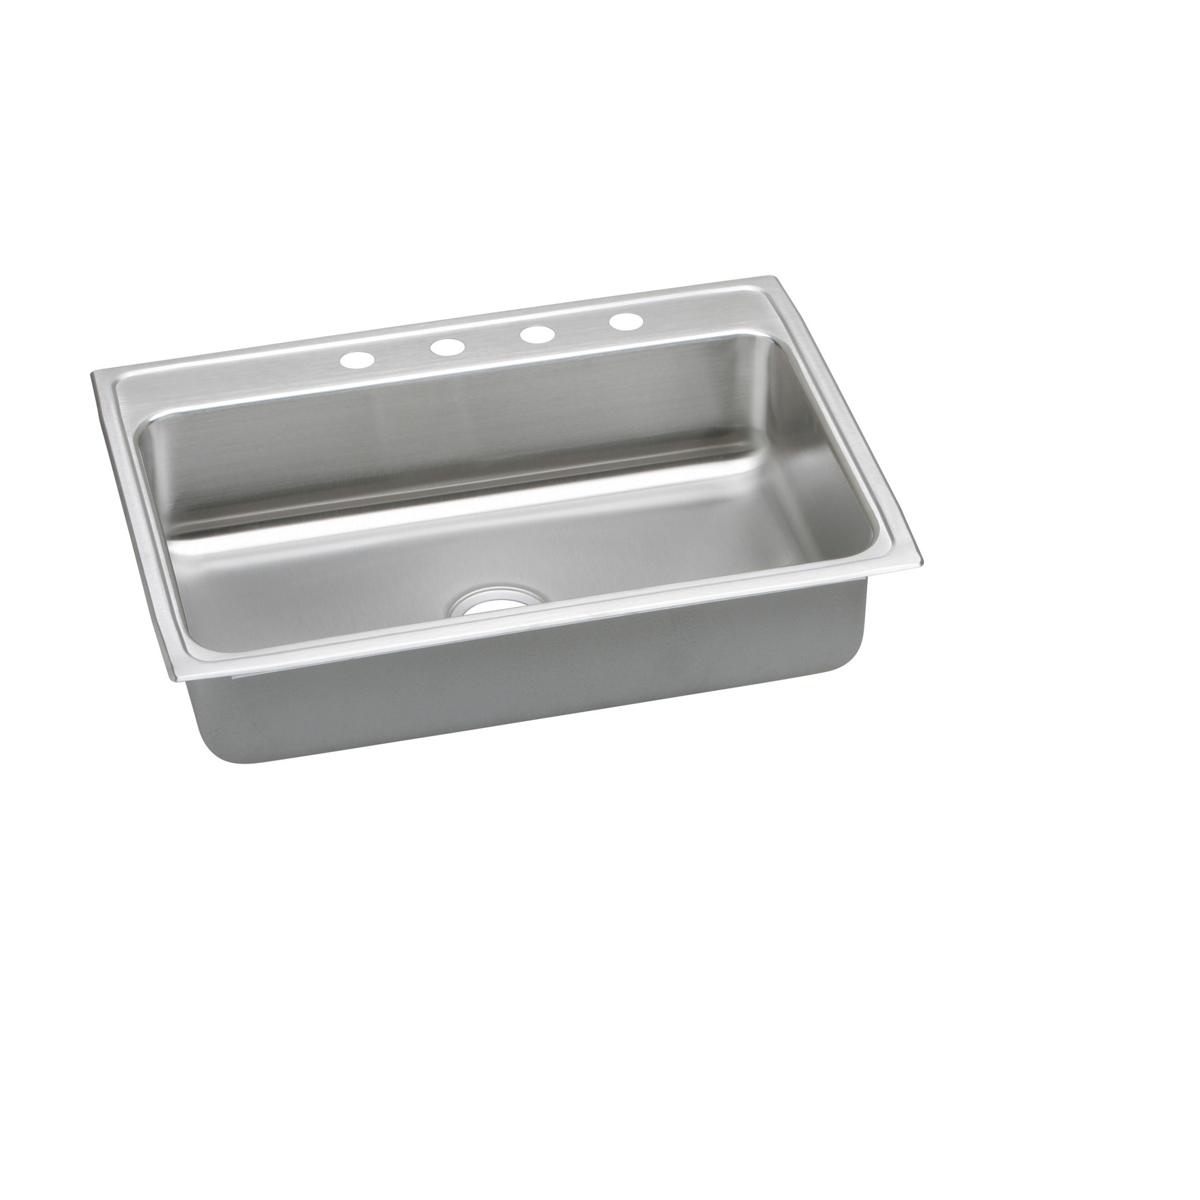 Elkay Lustertone Classic 31" x 22" x 6" Single Bowl Drop-in ADA Sink with Quick-clip